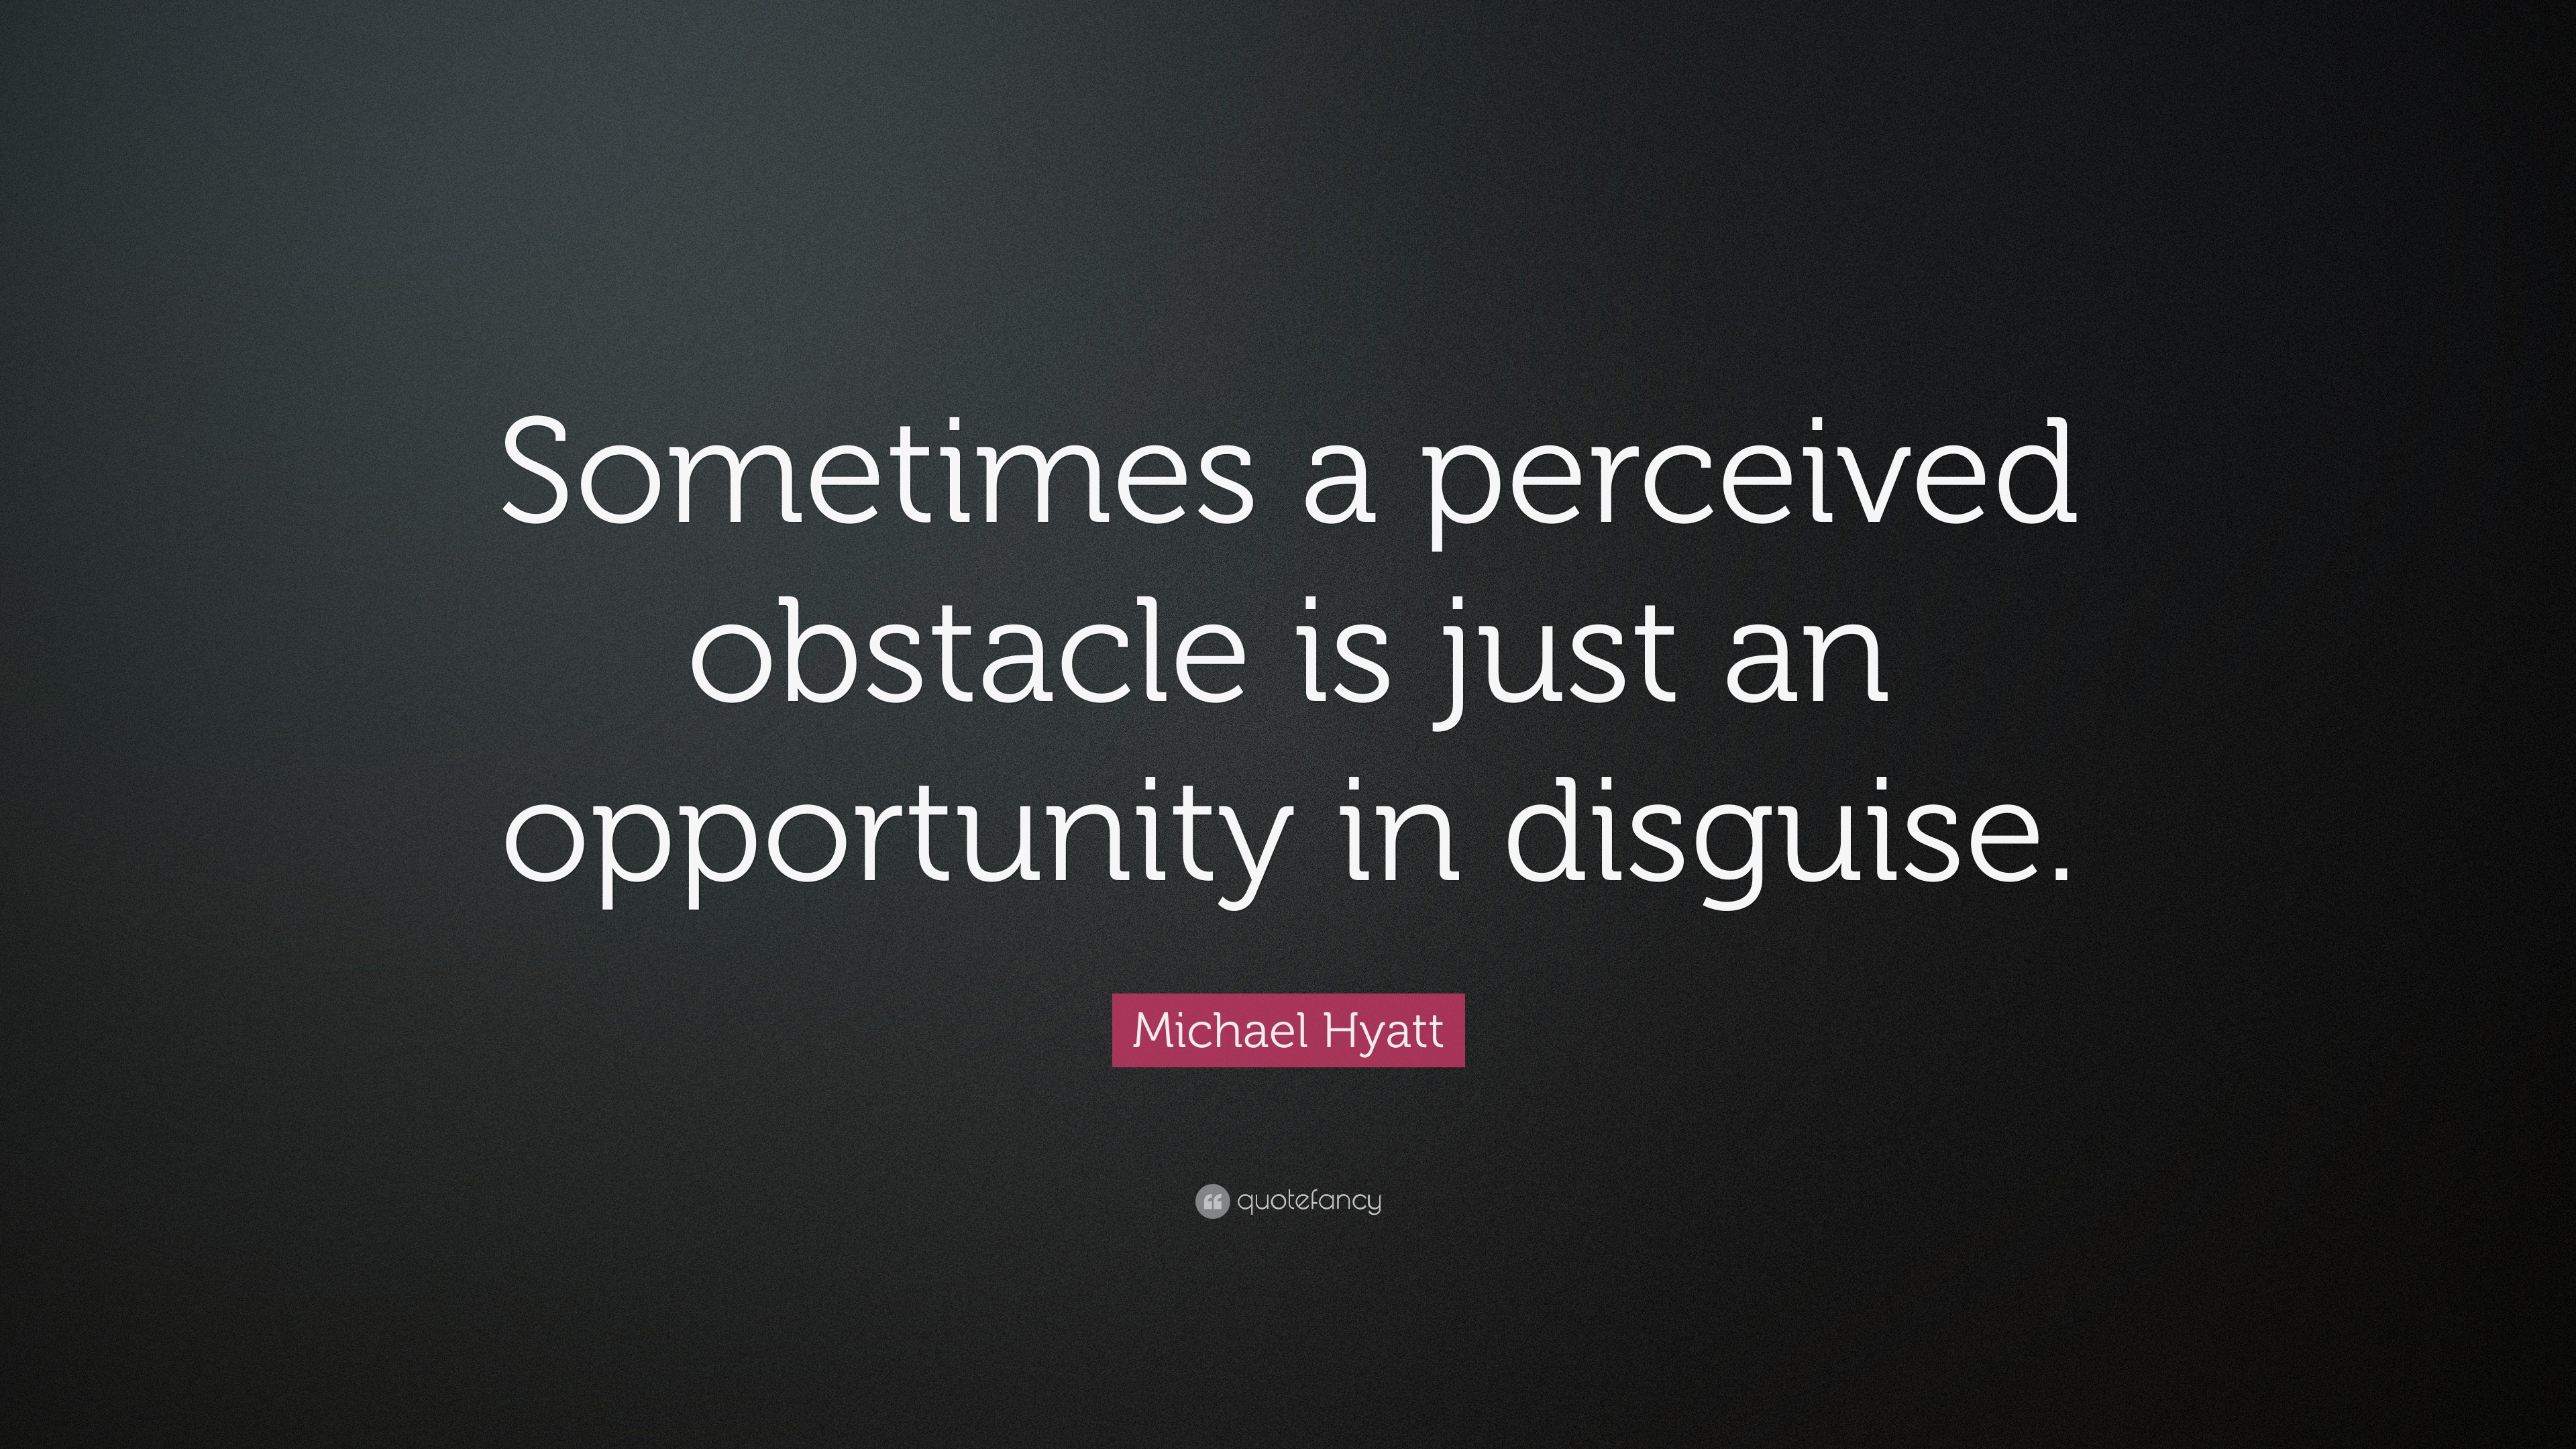 Michael Hyatt Quote: “Sometimes a perceived obstacle is just an ...